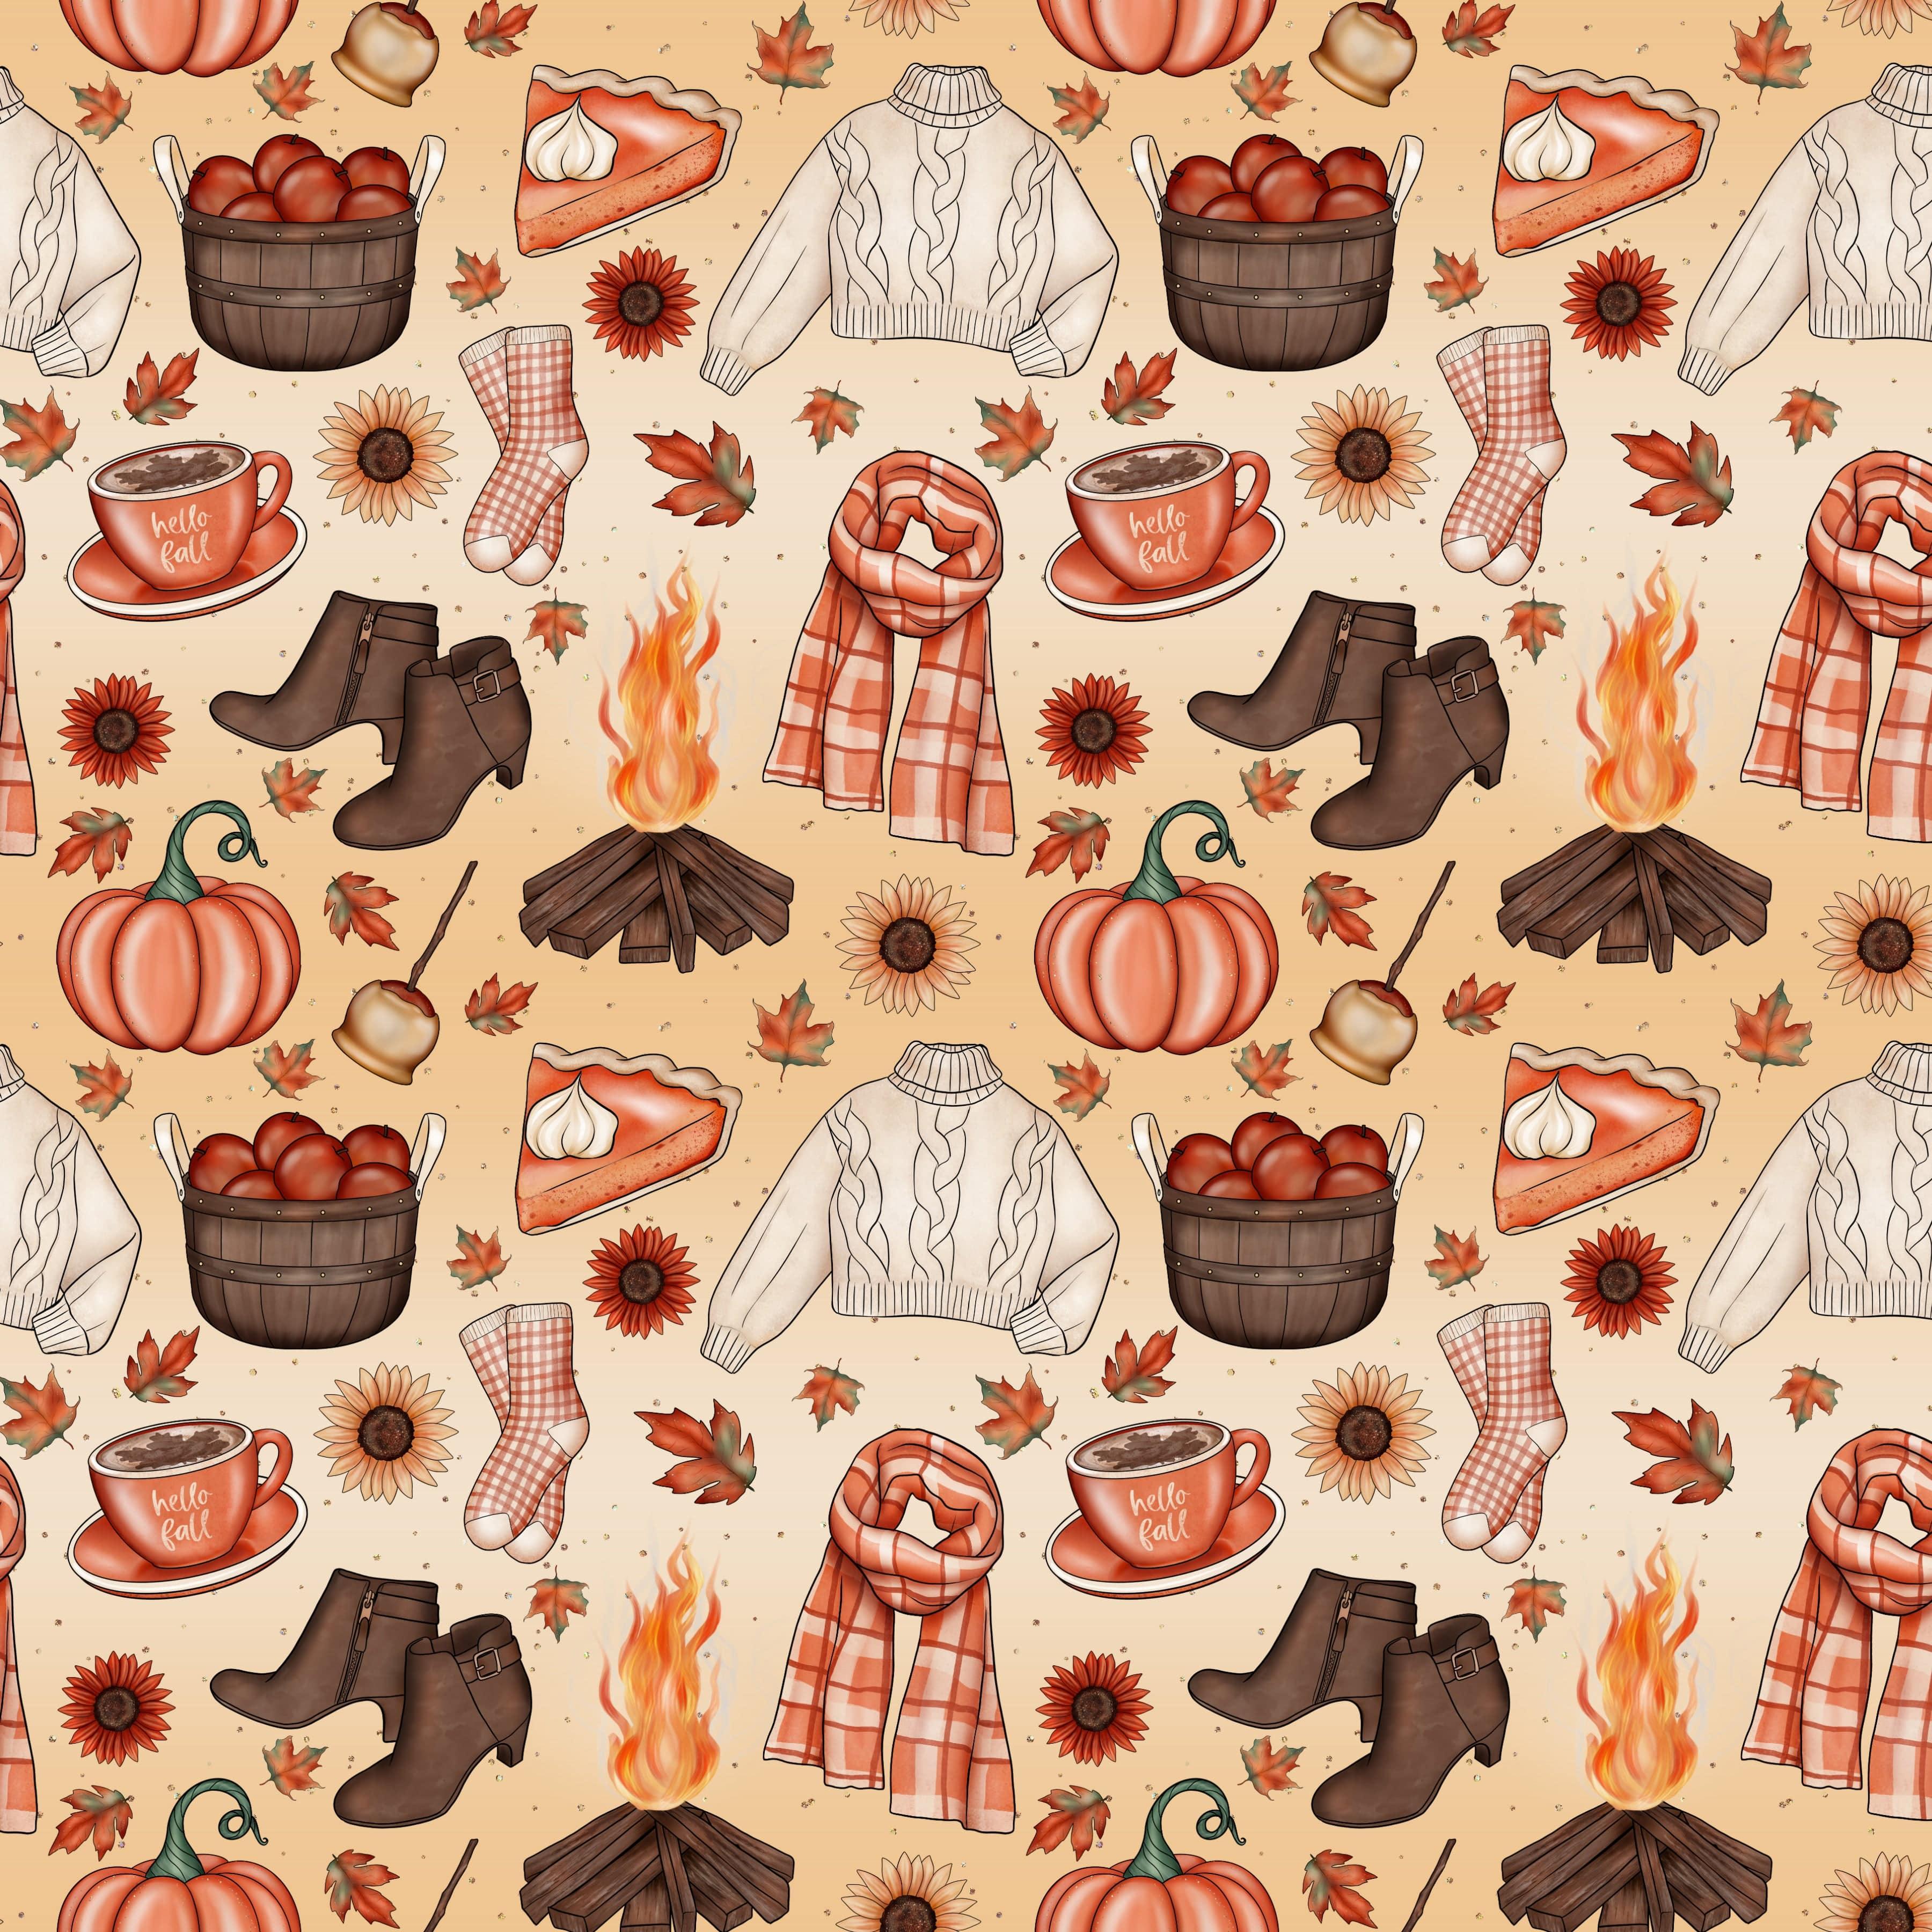 Gaynor Carradice's Autumn Favorites Collection Autumn Favorites 12 x 12 Double-Sided Scrapbook Paper by SSC Designs - Scrapbook Supply Companies